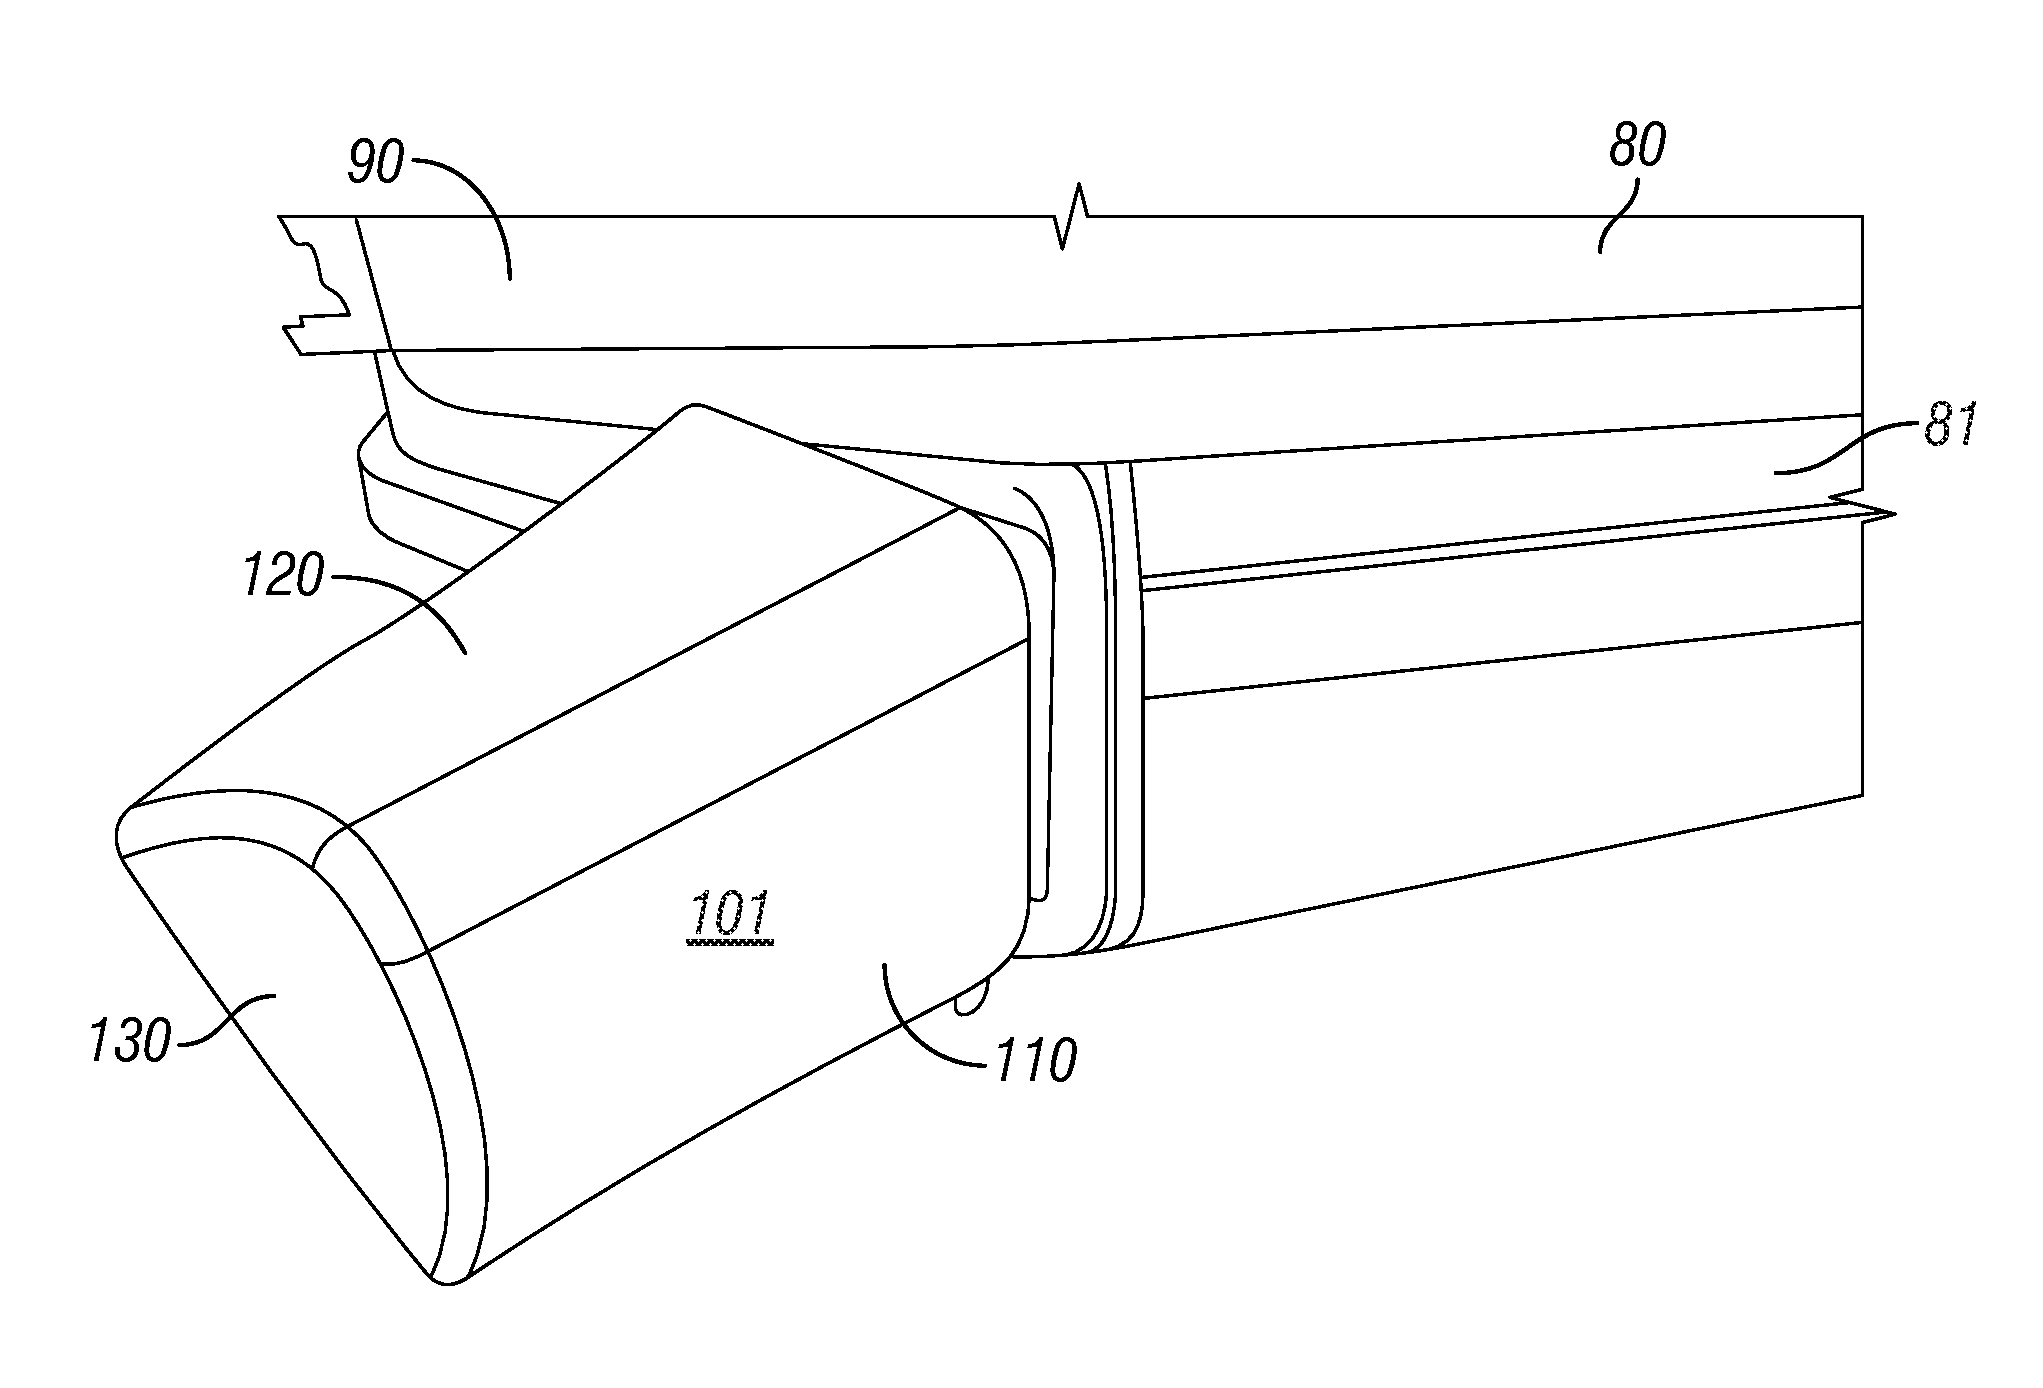 Apparatus and method for wave shaping